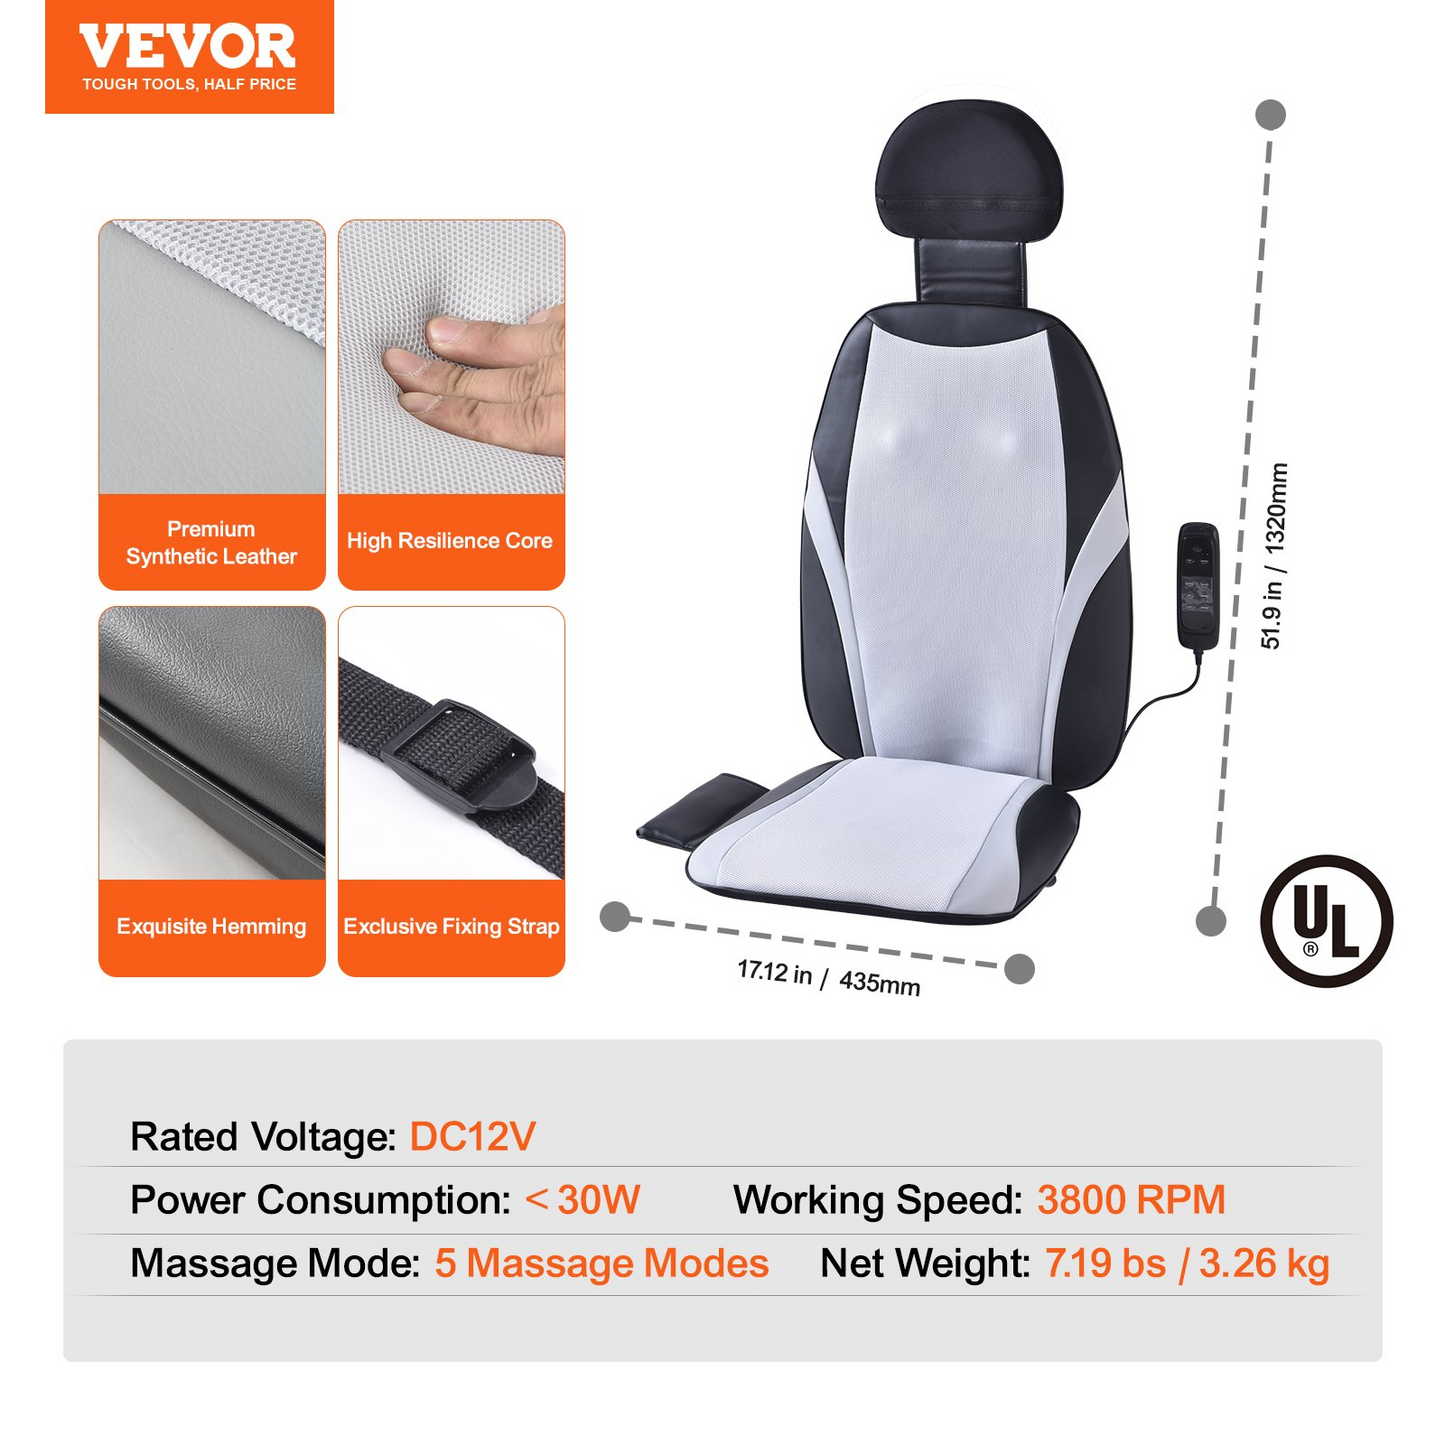 VEVOR Shiatsu Back Massager with Heat, Massage Seat Cushion with 2-Group Back Shiatsu Rollers and 2 Seat Vibration Motors, Fatigue Relief Seat Massage Chair Pad with 5 Vibration Modes for Home Office, Goodies N Stuff